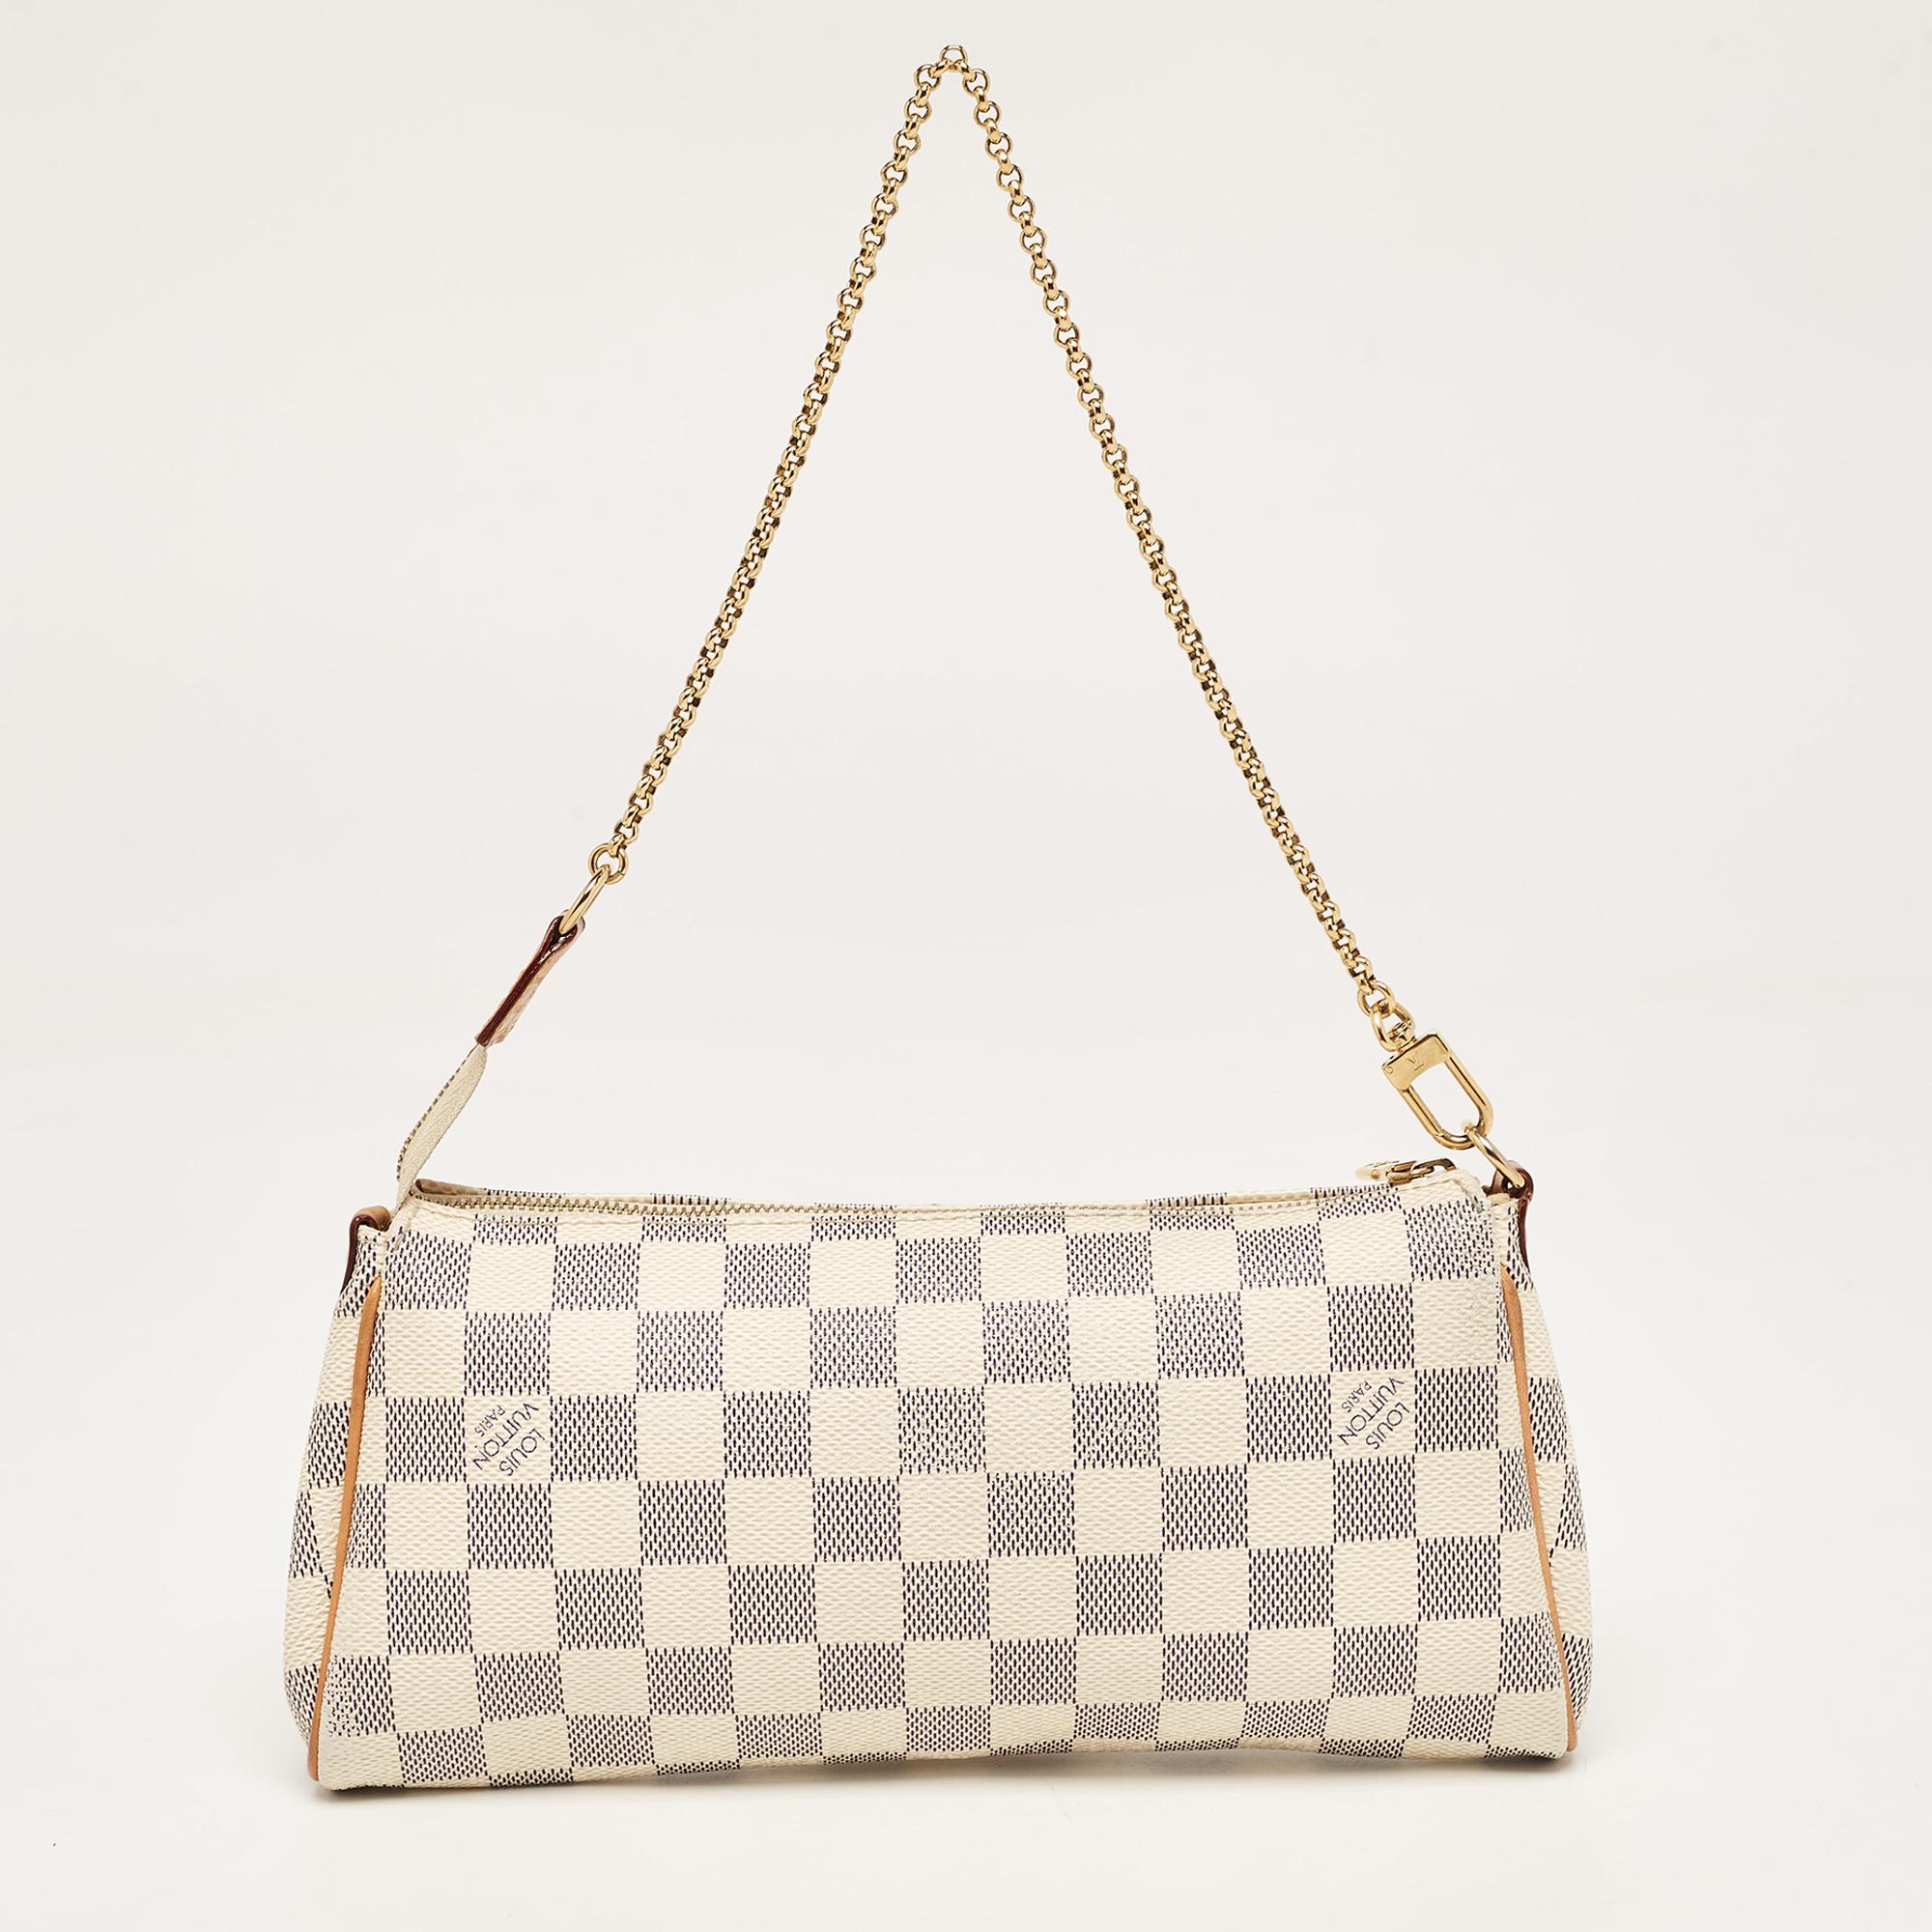 The house of Louis Vuitton offers this beautiful creation to help you create timeless style edits every season. Crafted with quality materials, this piece will last you a long time.

Includes: Detachable Strap